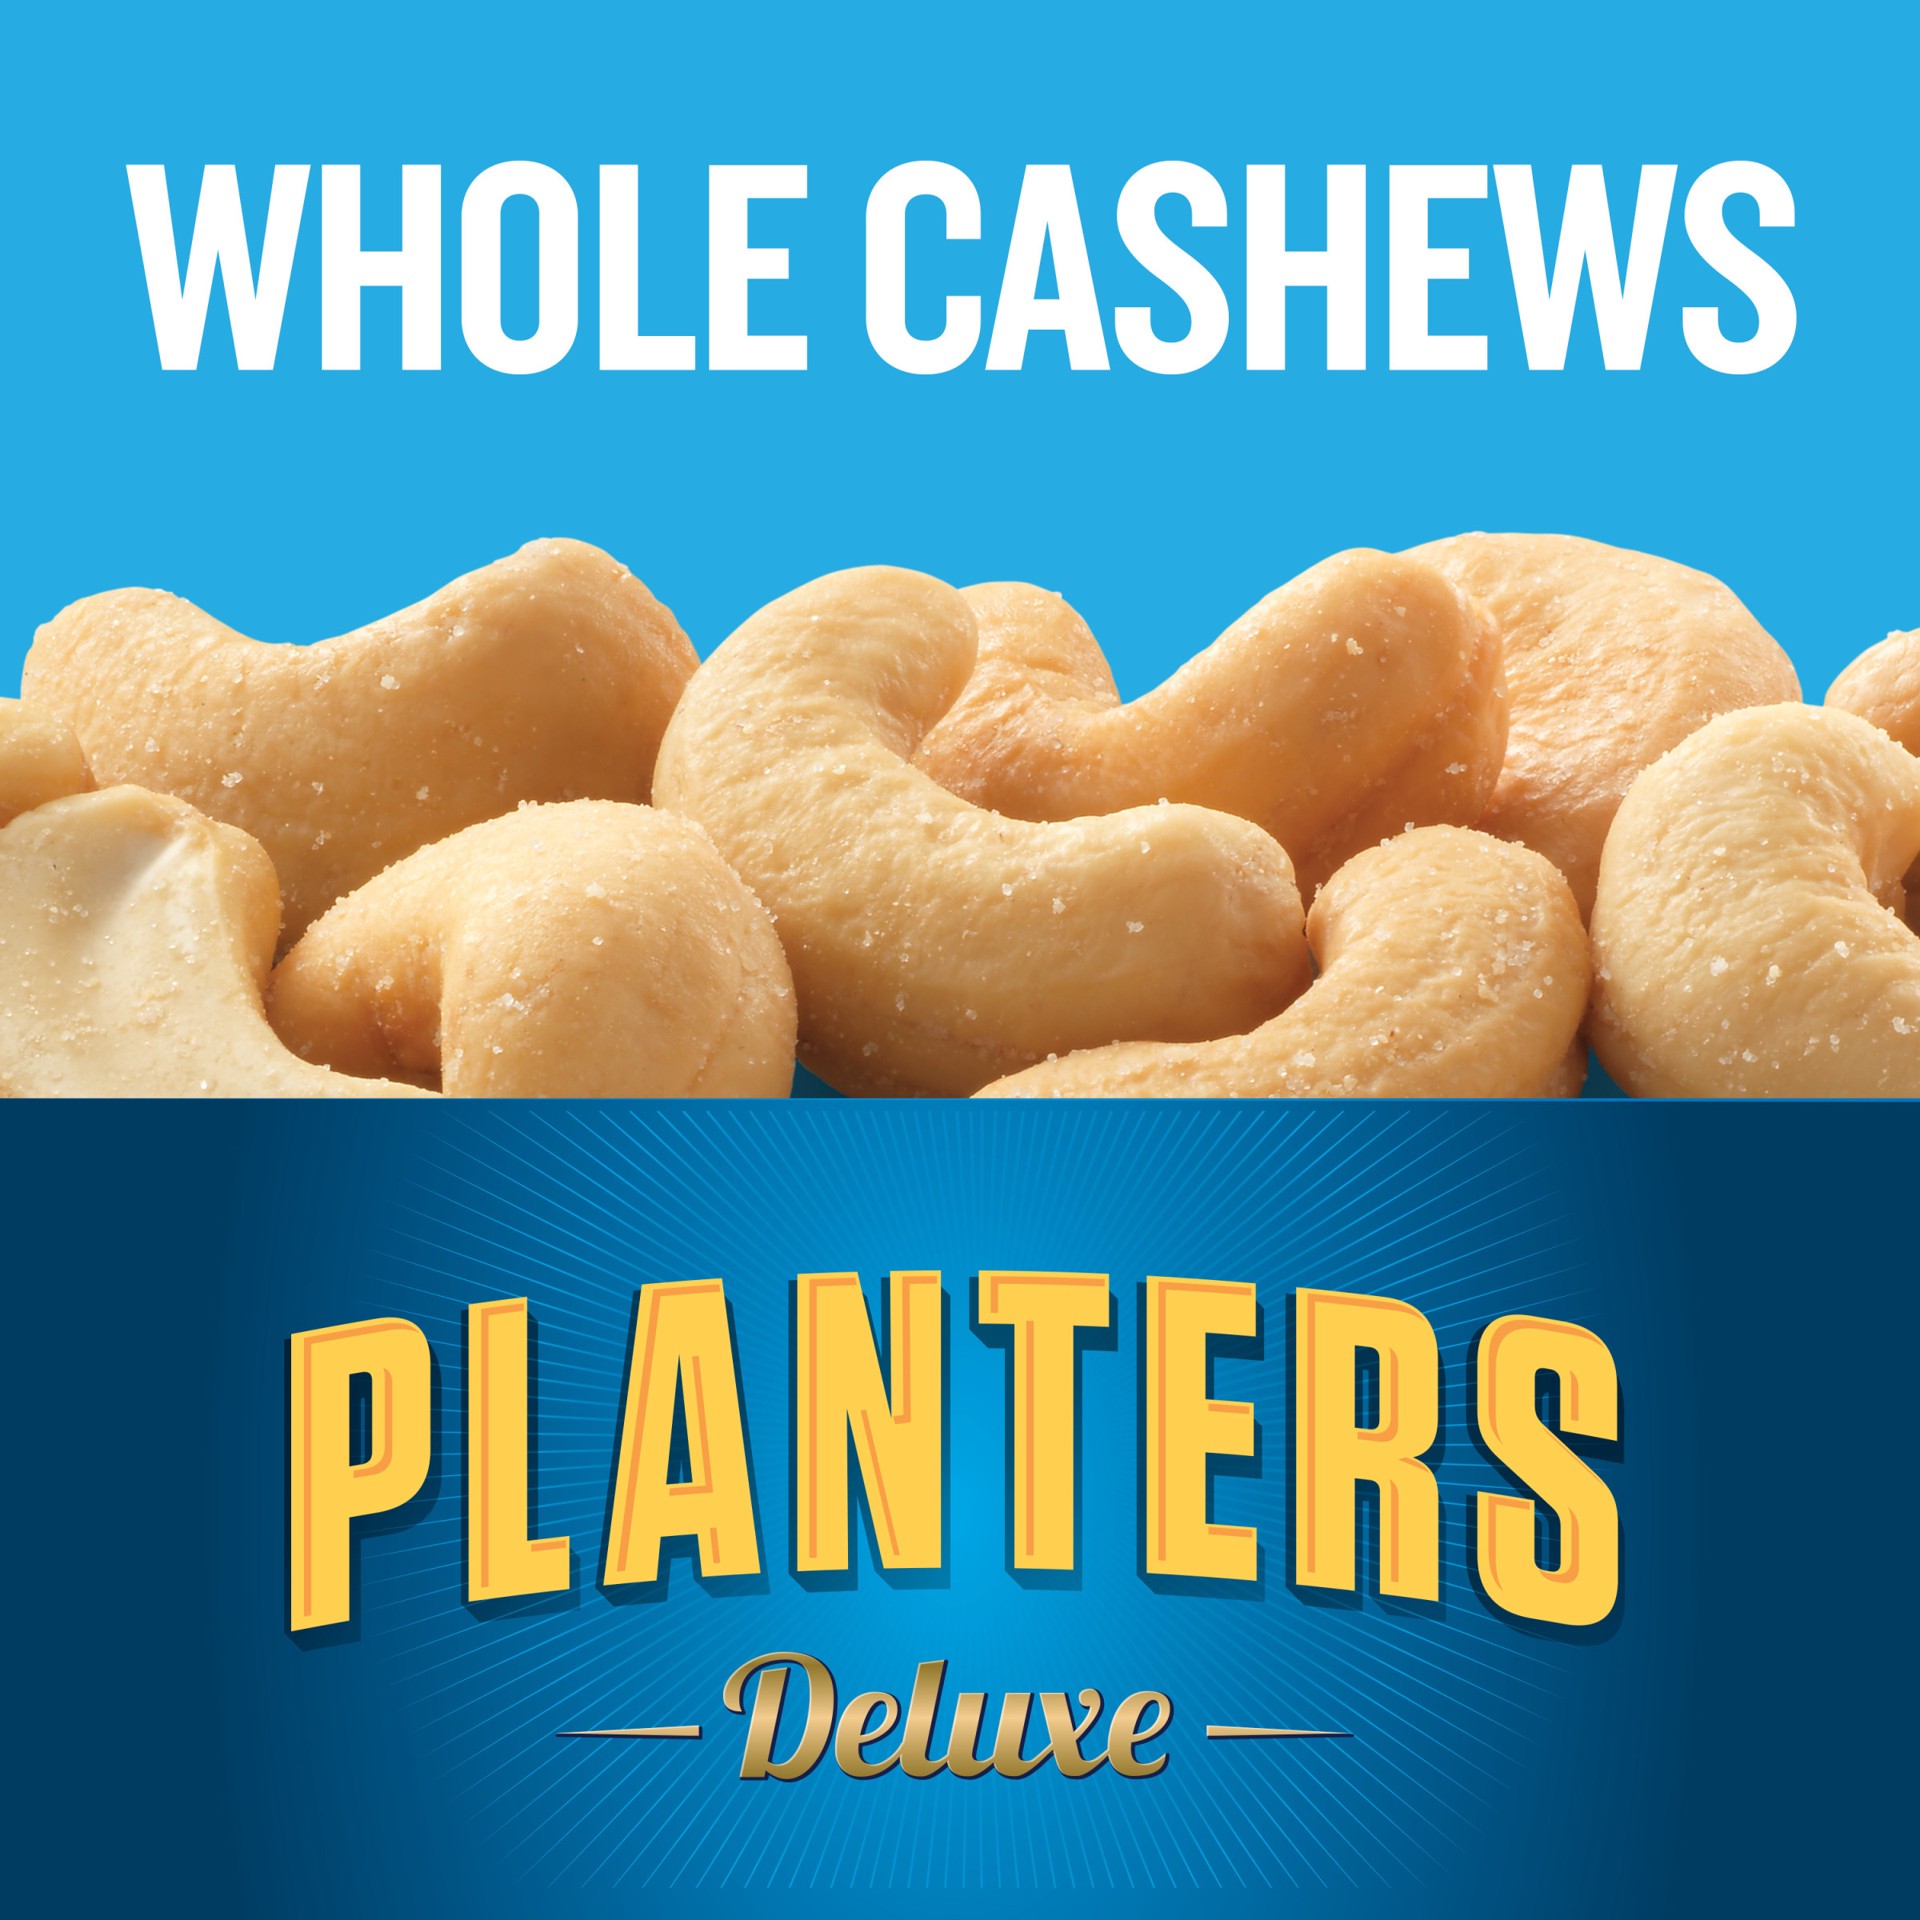 slide 2 of 5, Planters Deluxe Lightly Salted Whole Cashews, 8.5 oz